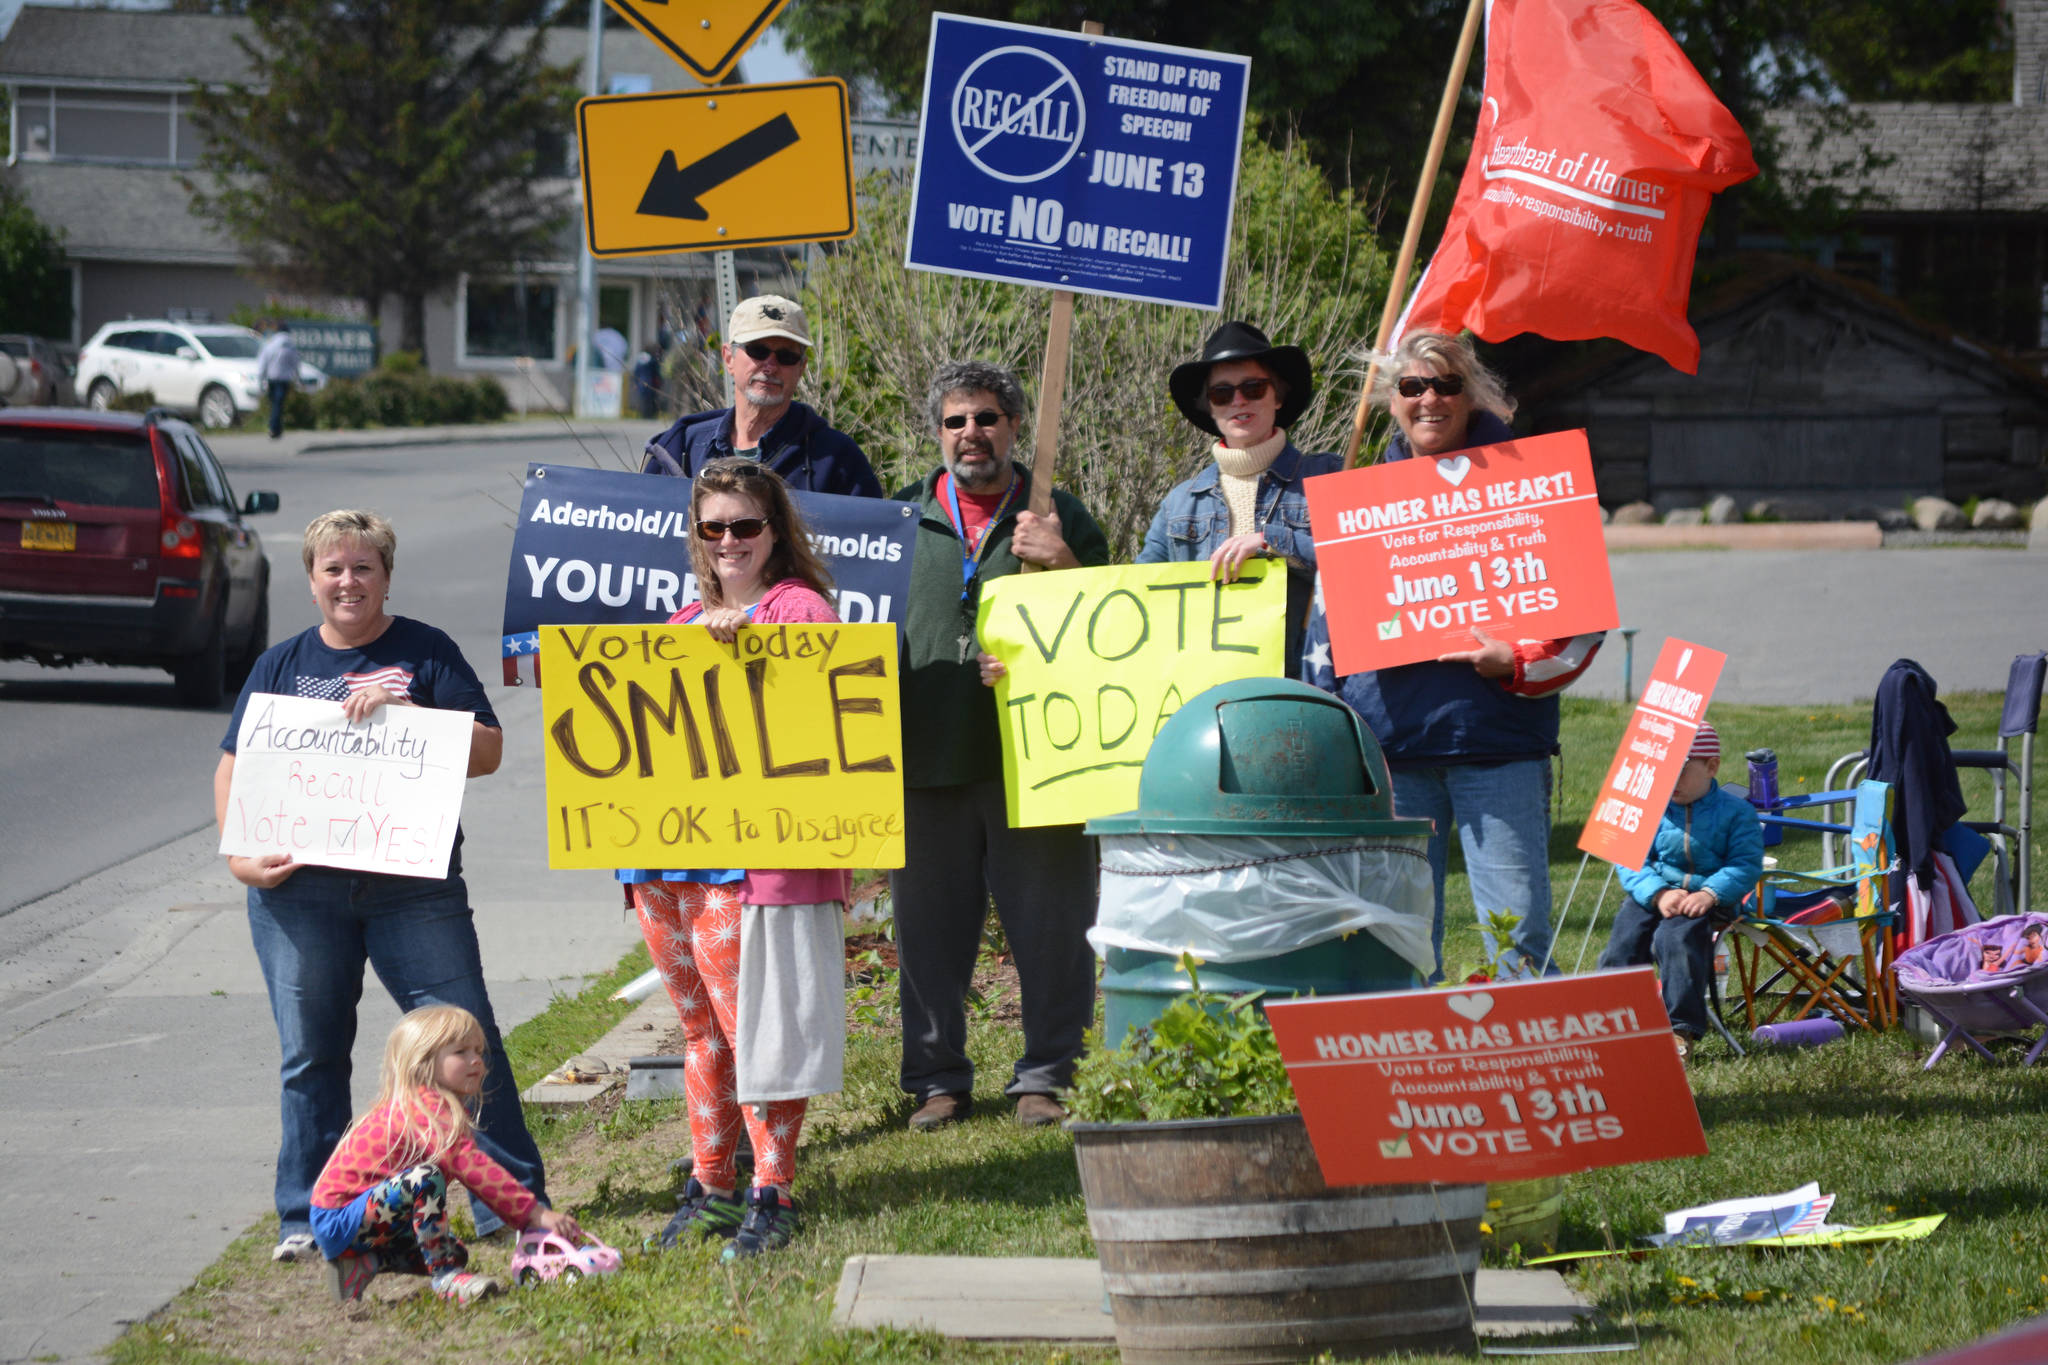 Recall opponent Alex Koplin, center, with blue sign, joins pro-recall supporters at WKFL Park about 11 a.m. Tuesday as citizens rallied on Pioneer Avenue to state their sides in the recall special election. (Photo by Michael Armstrong, Homer News)